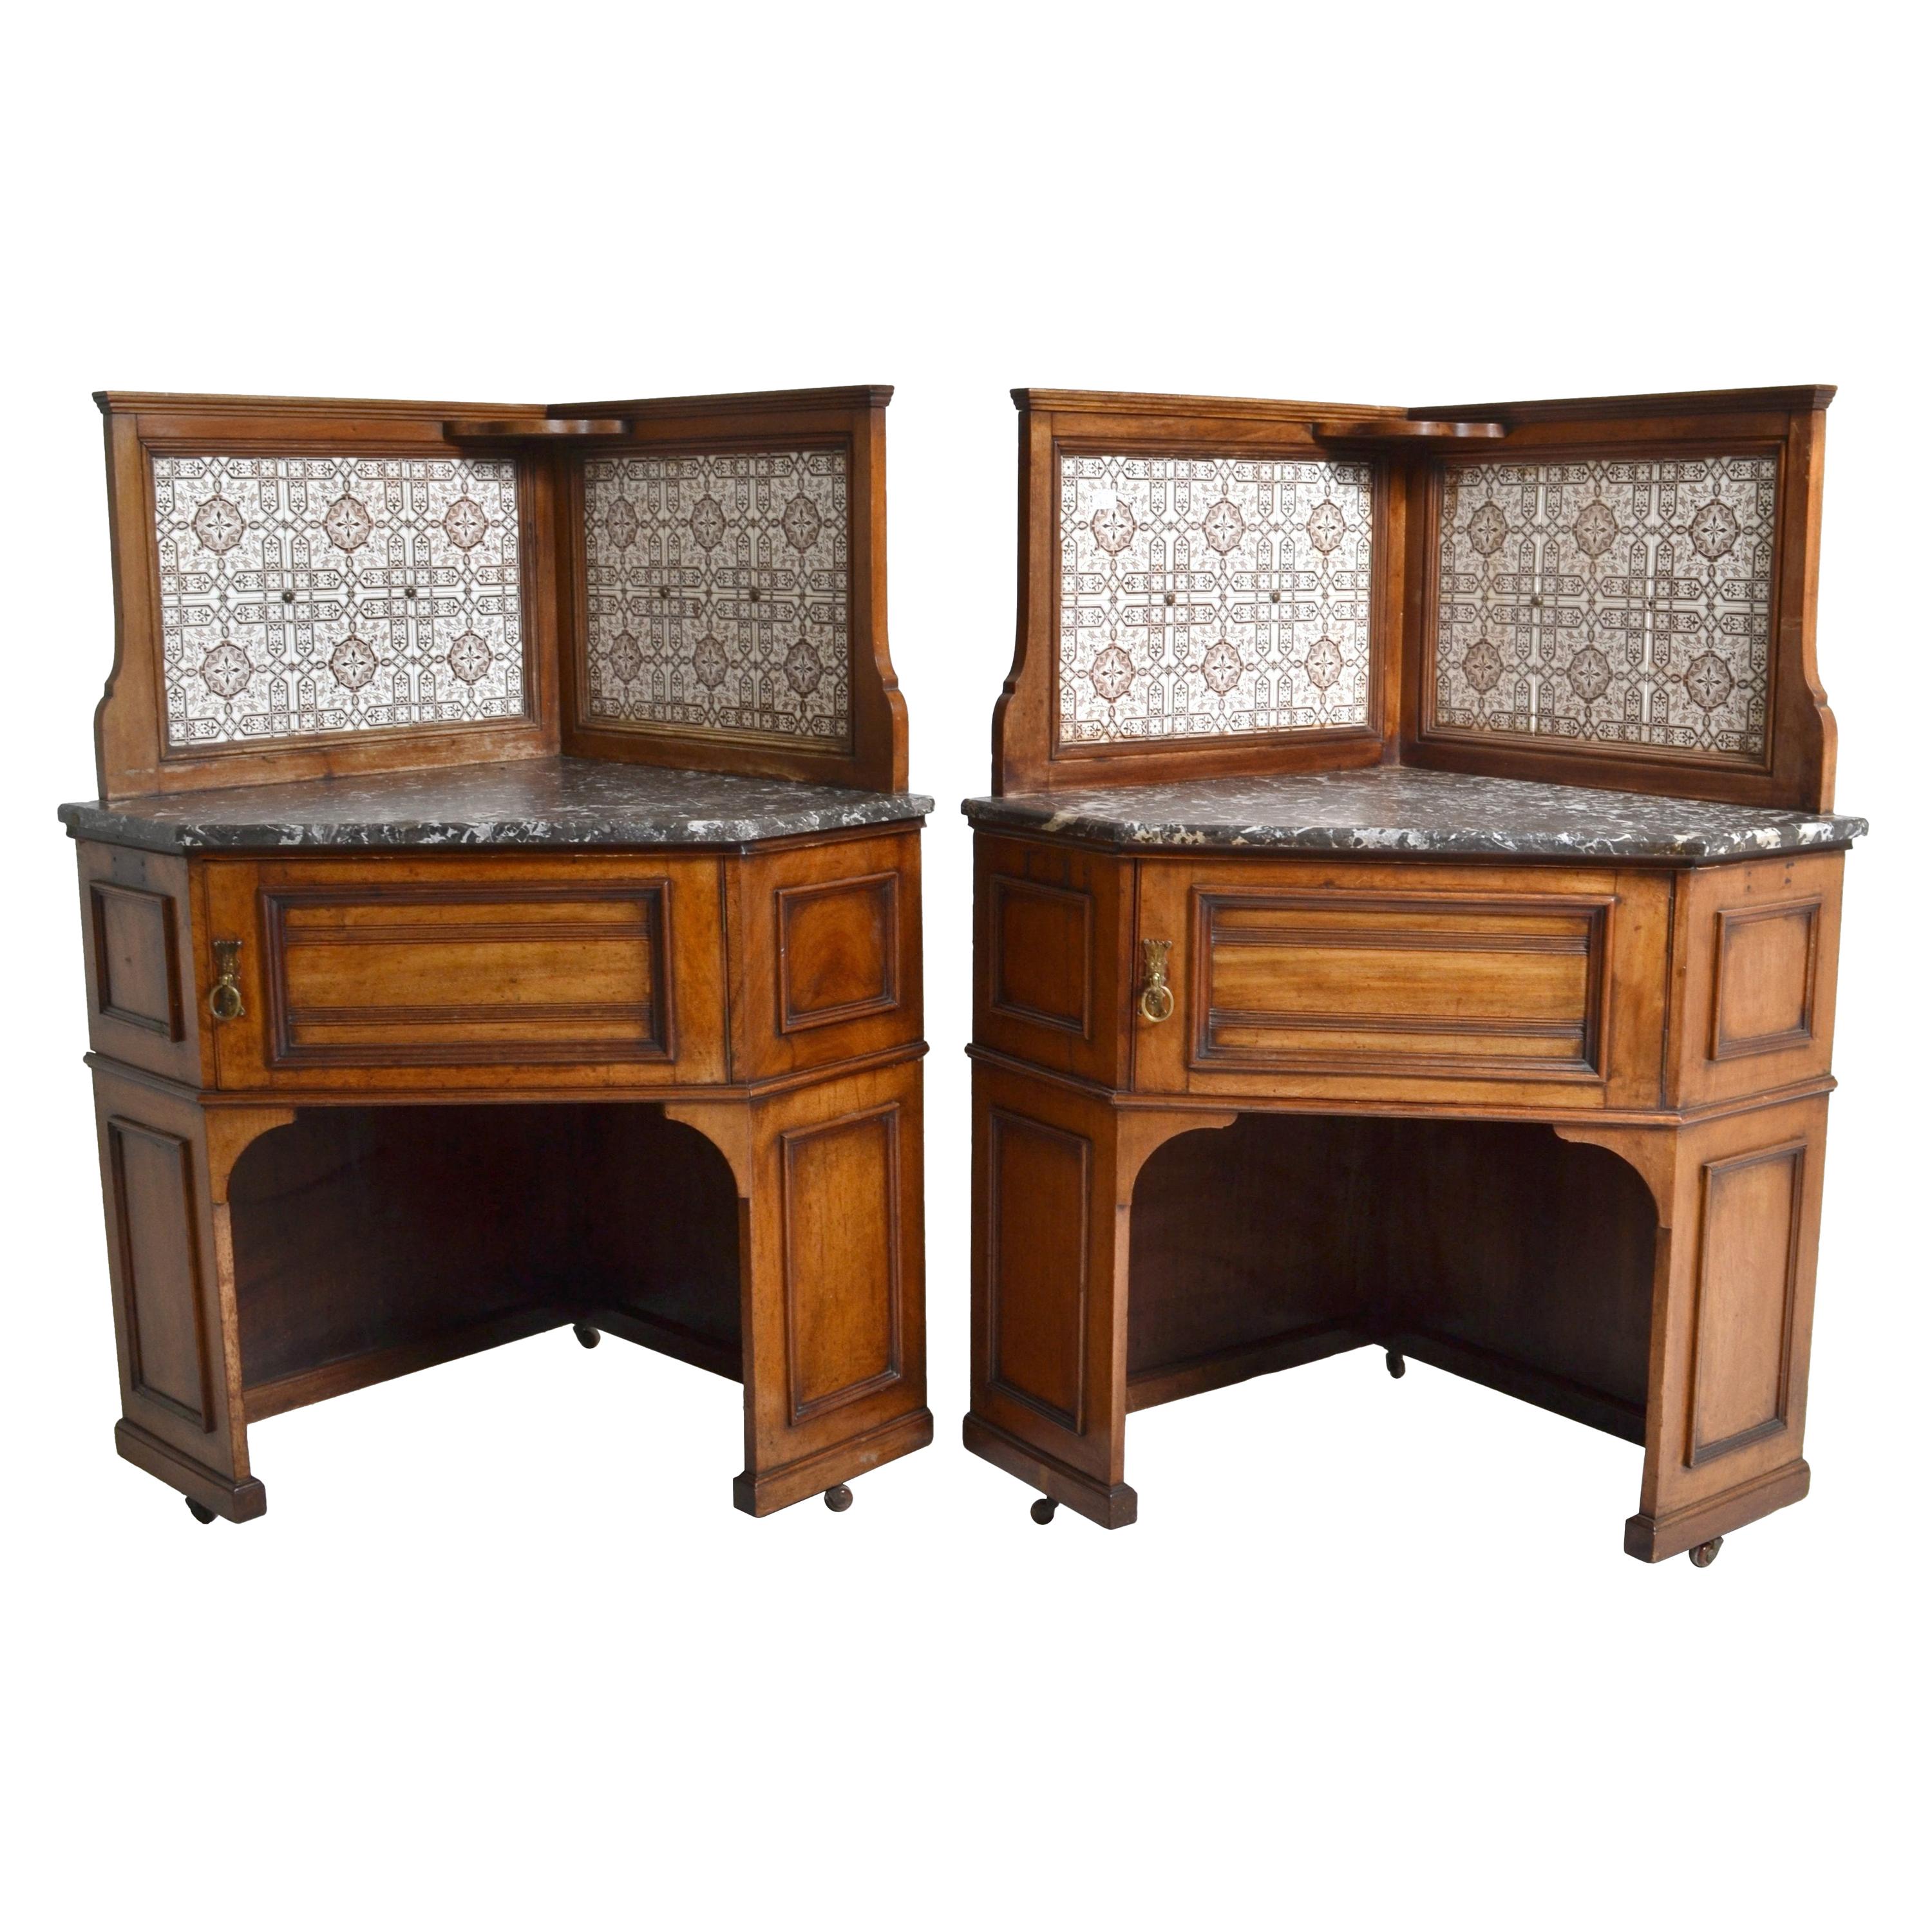 Pair of Oak Corner Washstands with Minton's Tiles by Maple of London, circa 1875